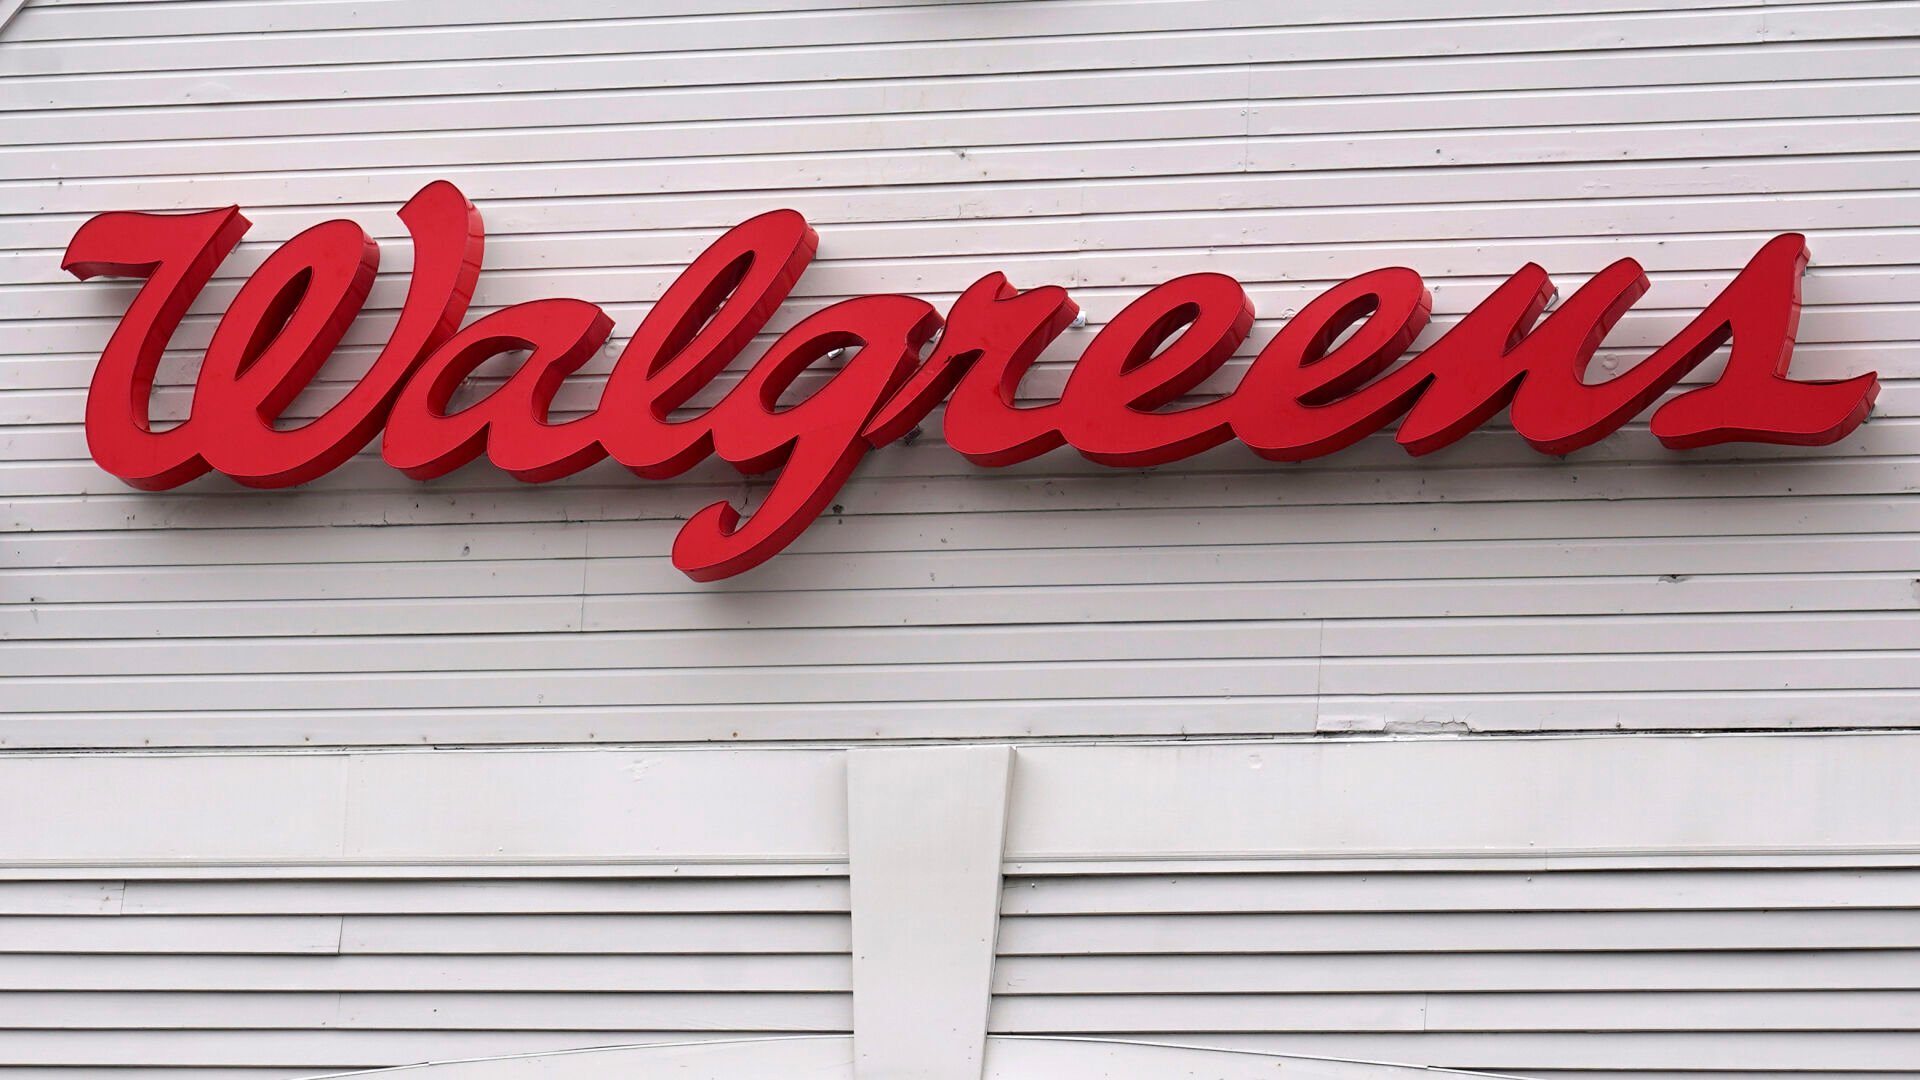 <p>FILE - The Walgreens logo on the front of a store, July 14, 2021, in Cambridge, Mass. A huge opioid settlement dragged Walgreens to a $3.7 billion loss in its fiscal first quarter, but the drugstore chain still beat Wall Street forecasts. The company also reaffirmed its earnings forecast for the new year. Walgreens said Thursday, Jan. 5, 2023 that it recorded a $5.2-billion, after-tax charge in the quarter that ended November 30 for opioid-related litigation. (AP Photo/Charles Krupa, File)</p>   PHOTO CREDIT: Charles Krupa 